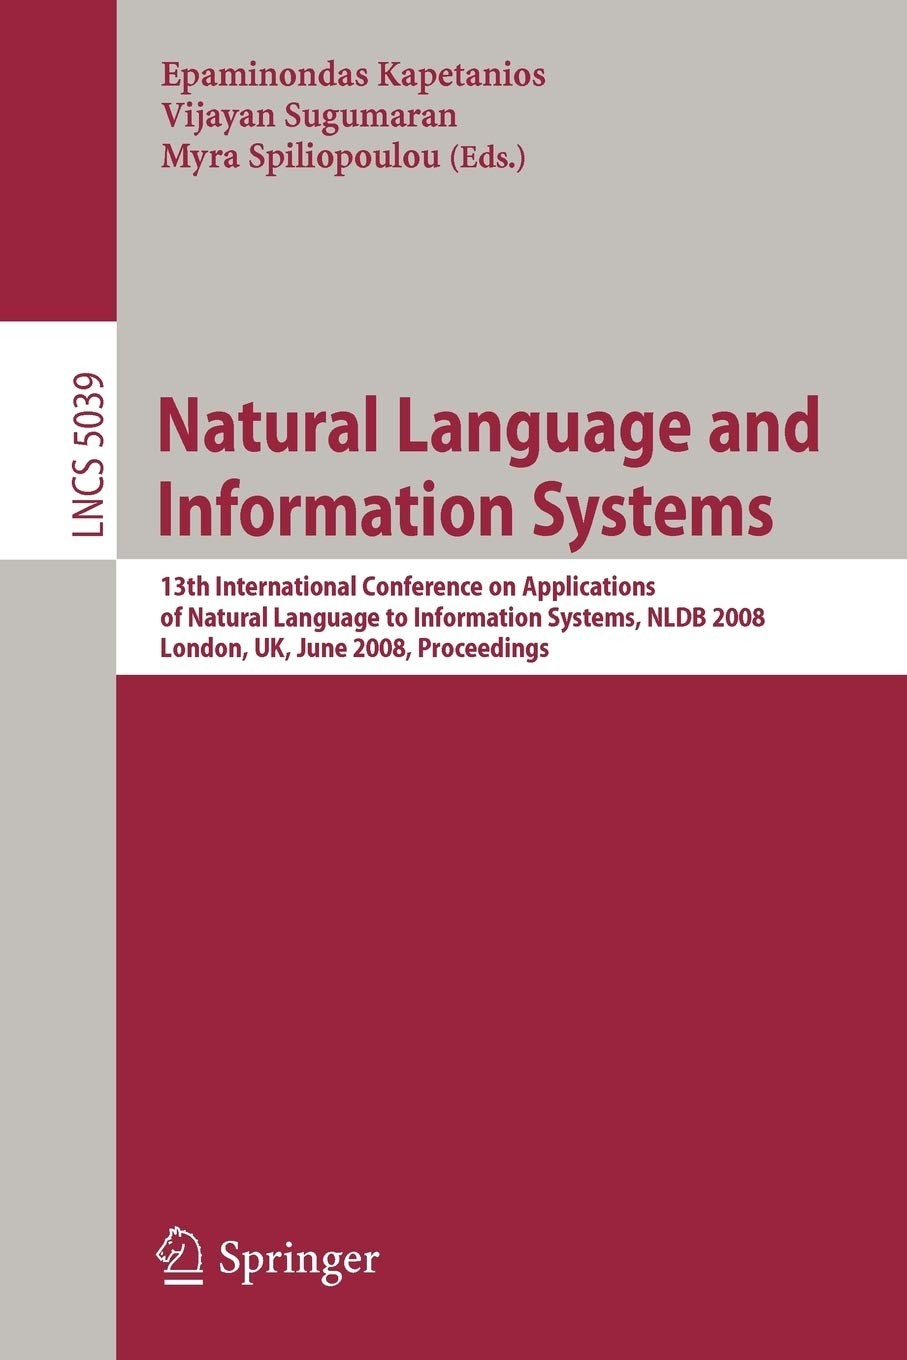 Natural Language and Information Systems: 13th International Conference on Applications of Natural Language to Information Systems, NLDB 2008 London, UK, June 24-27, 2008, Proceedings